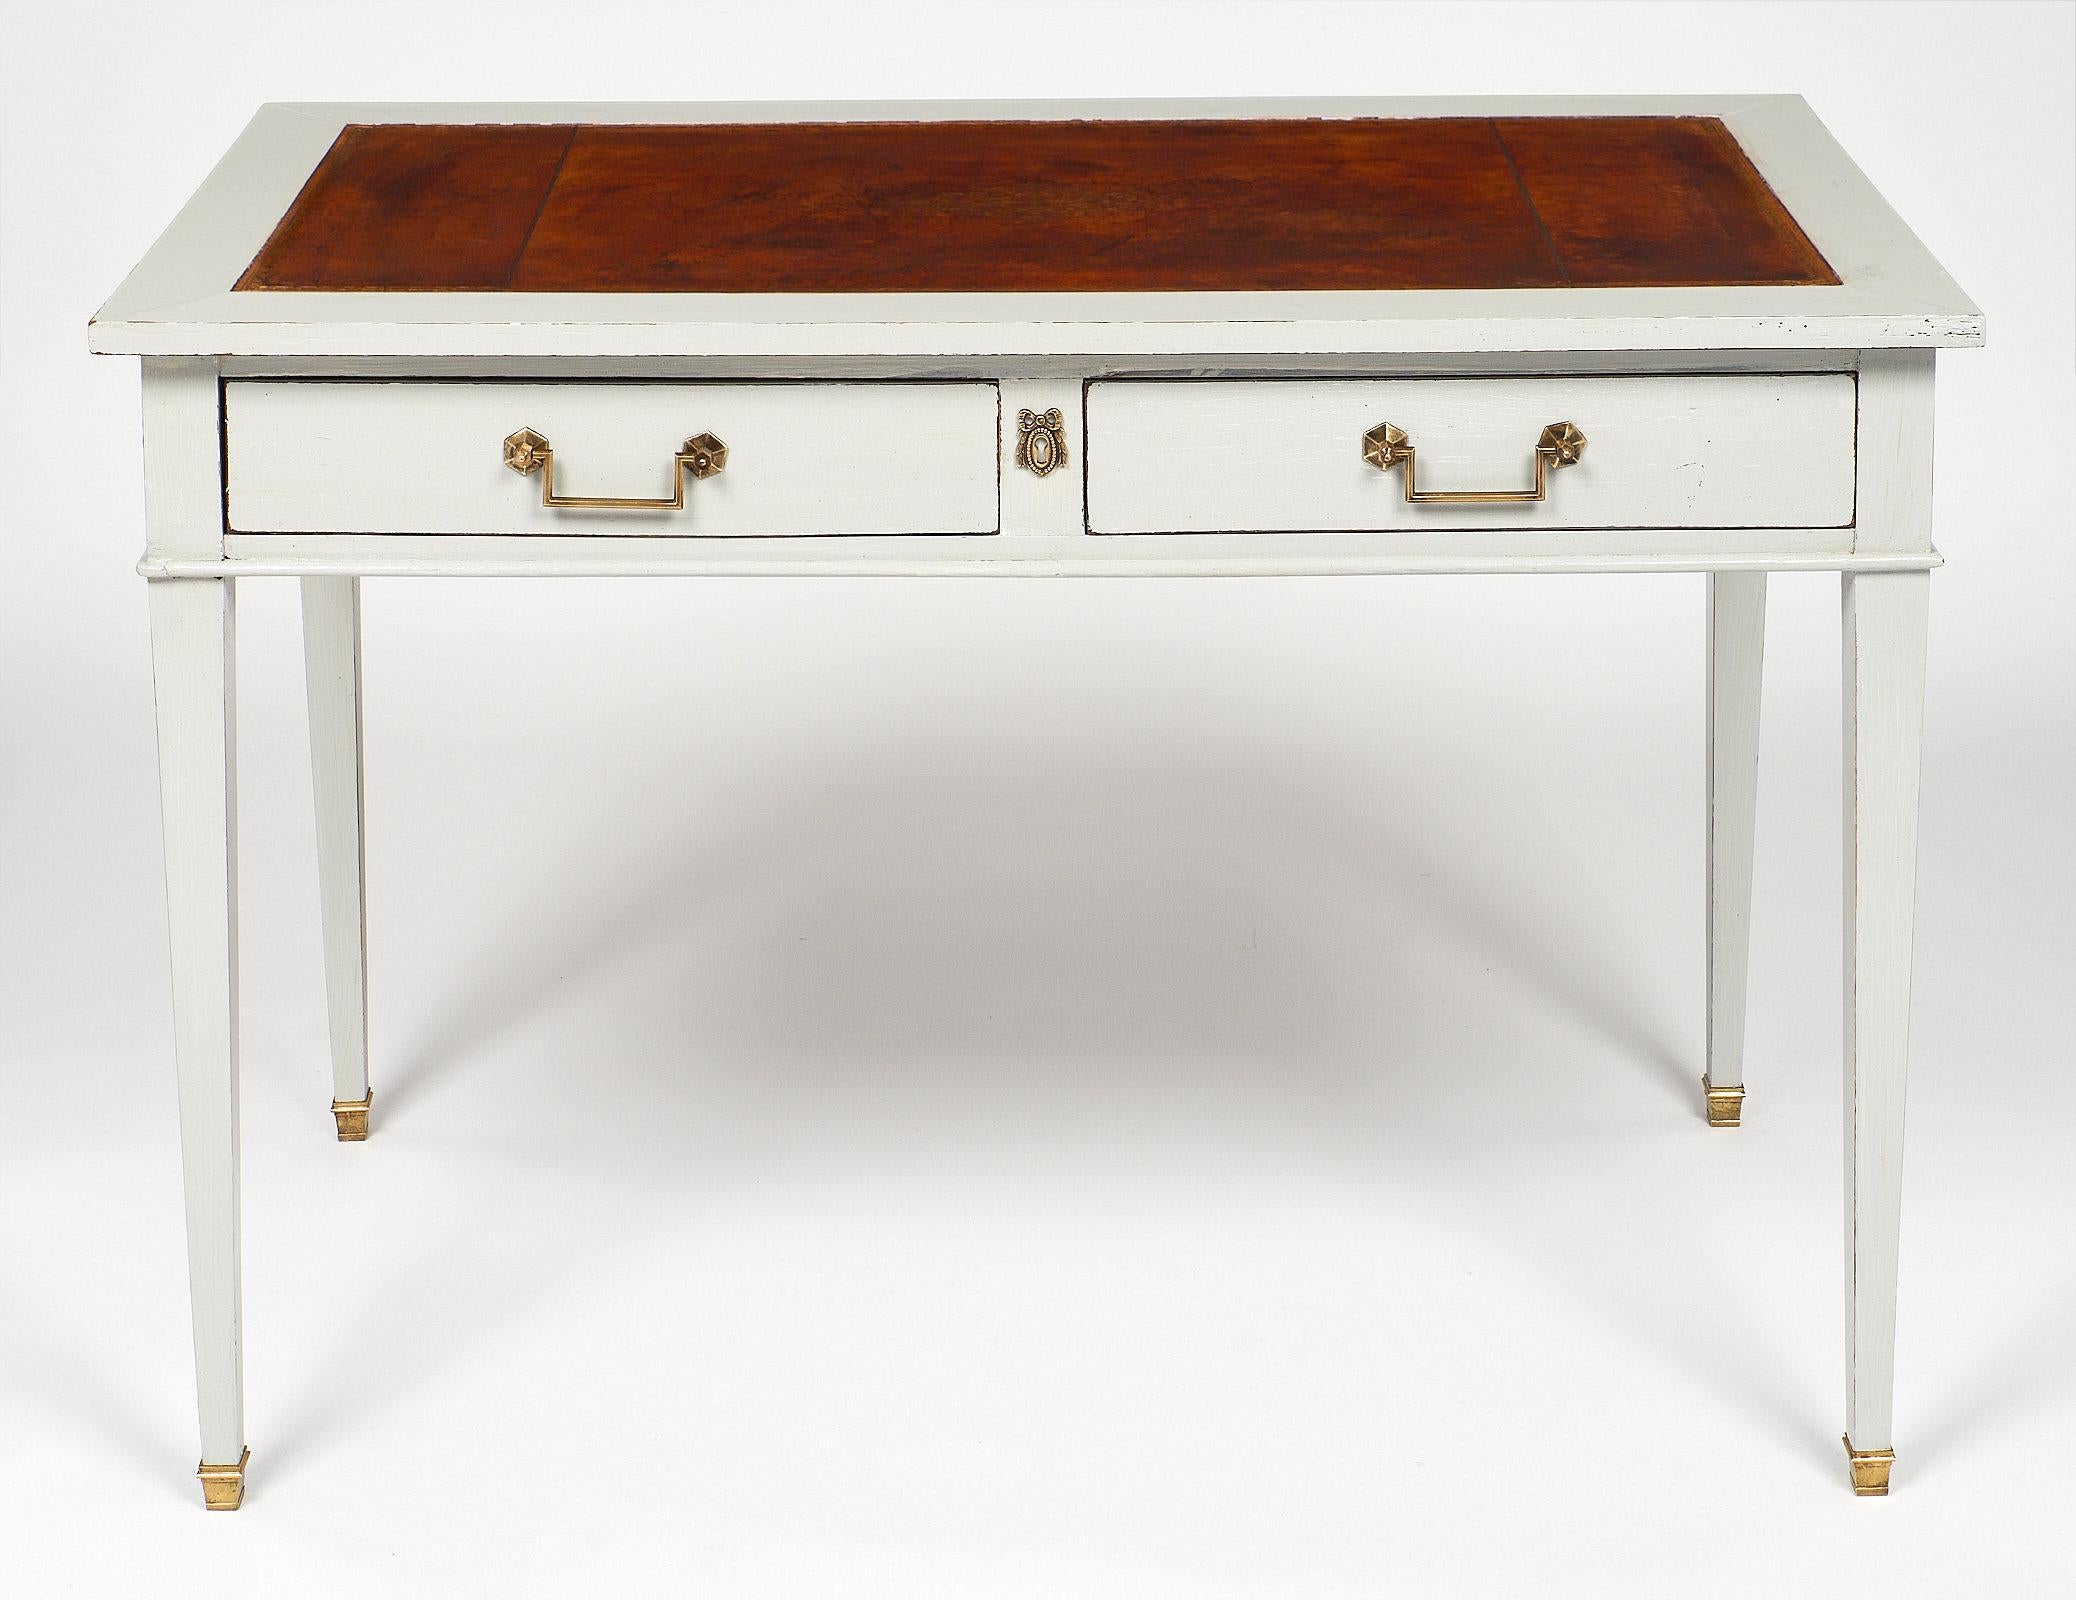 French Directoire style antique painted writing desk in a “Trianon” gray color. A waxed Moroccan leather top embossed with a gilded frieze, and two pull-out extensions complete the writing surface. We love the squared and tapered legs, brass